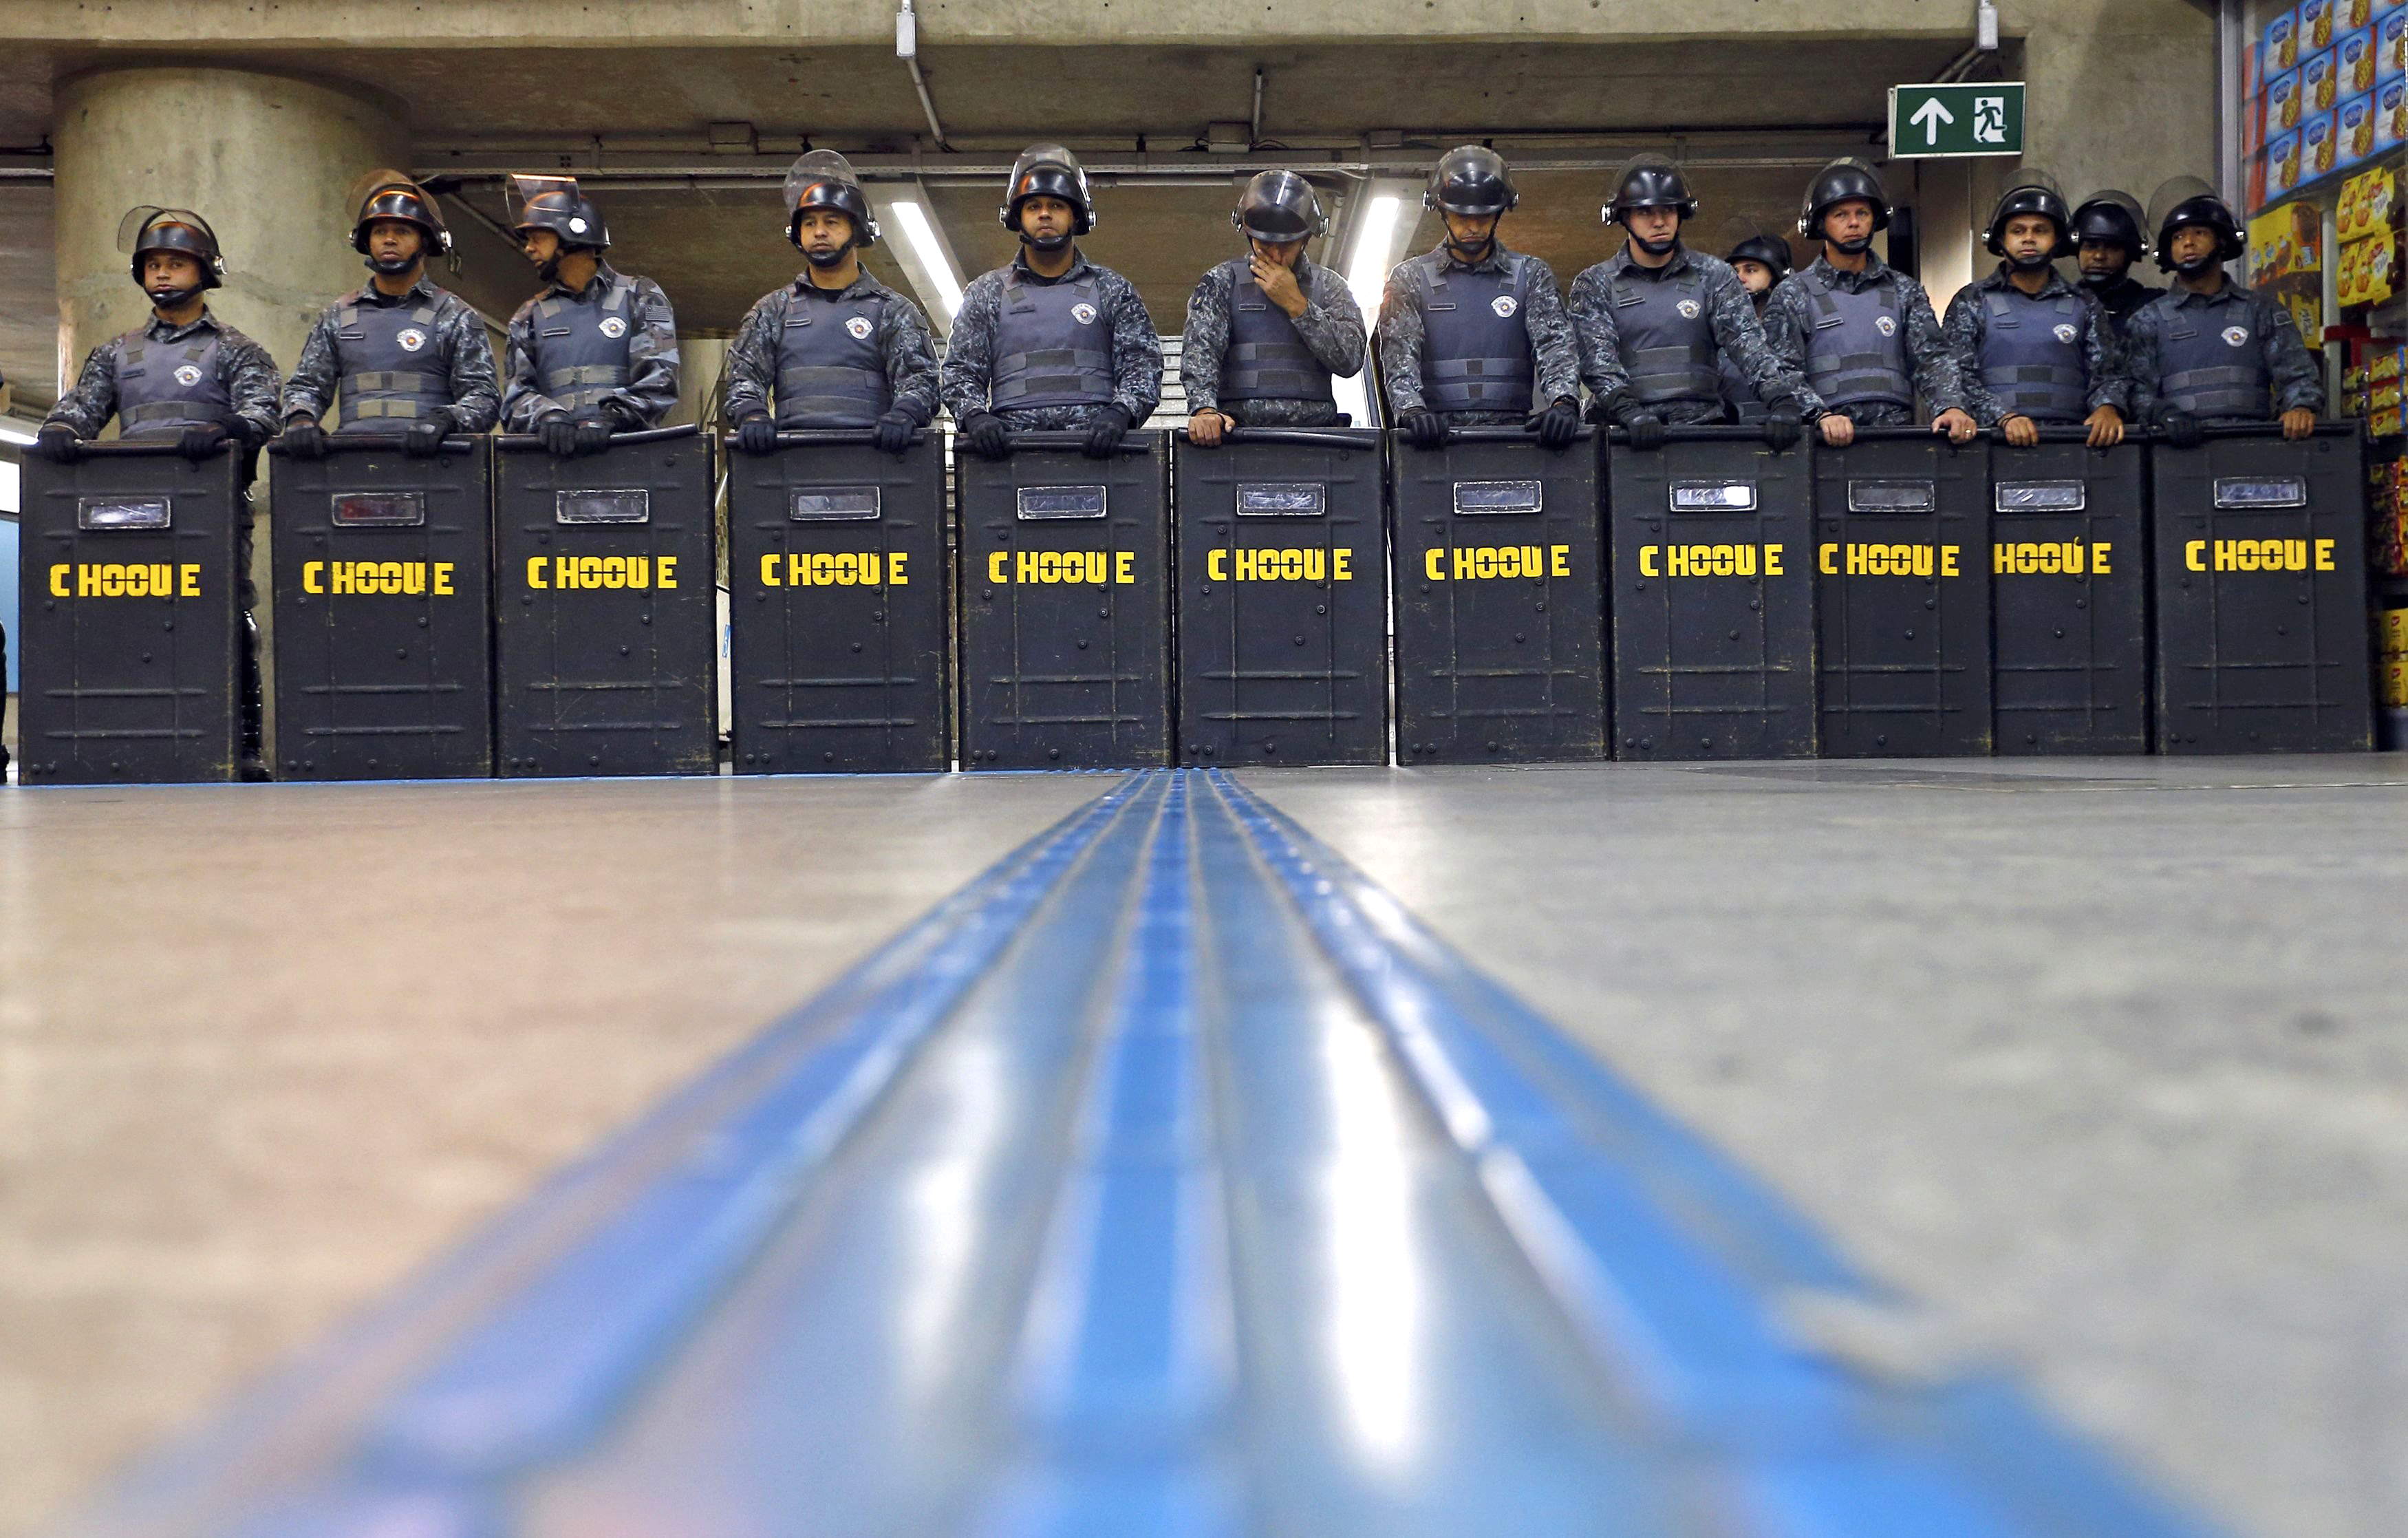 Policemen in riot gear stand inside Ana Rosa subway station during the fifth day of metro worker's protest in Sao Paulo on June 9, 2014.